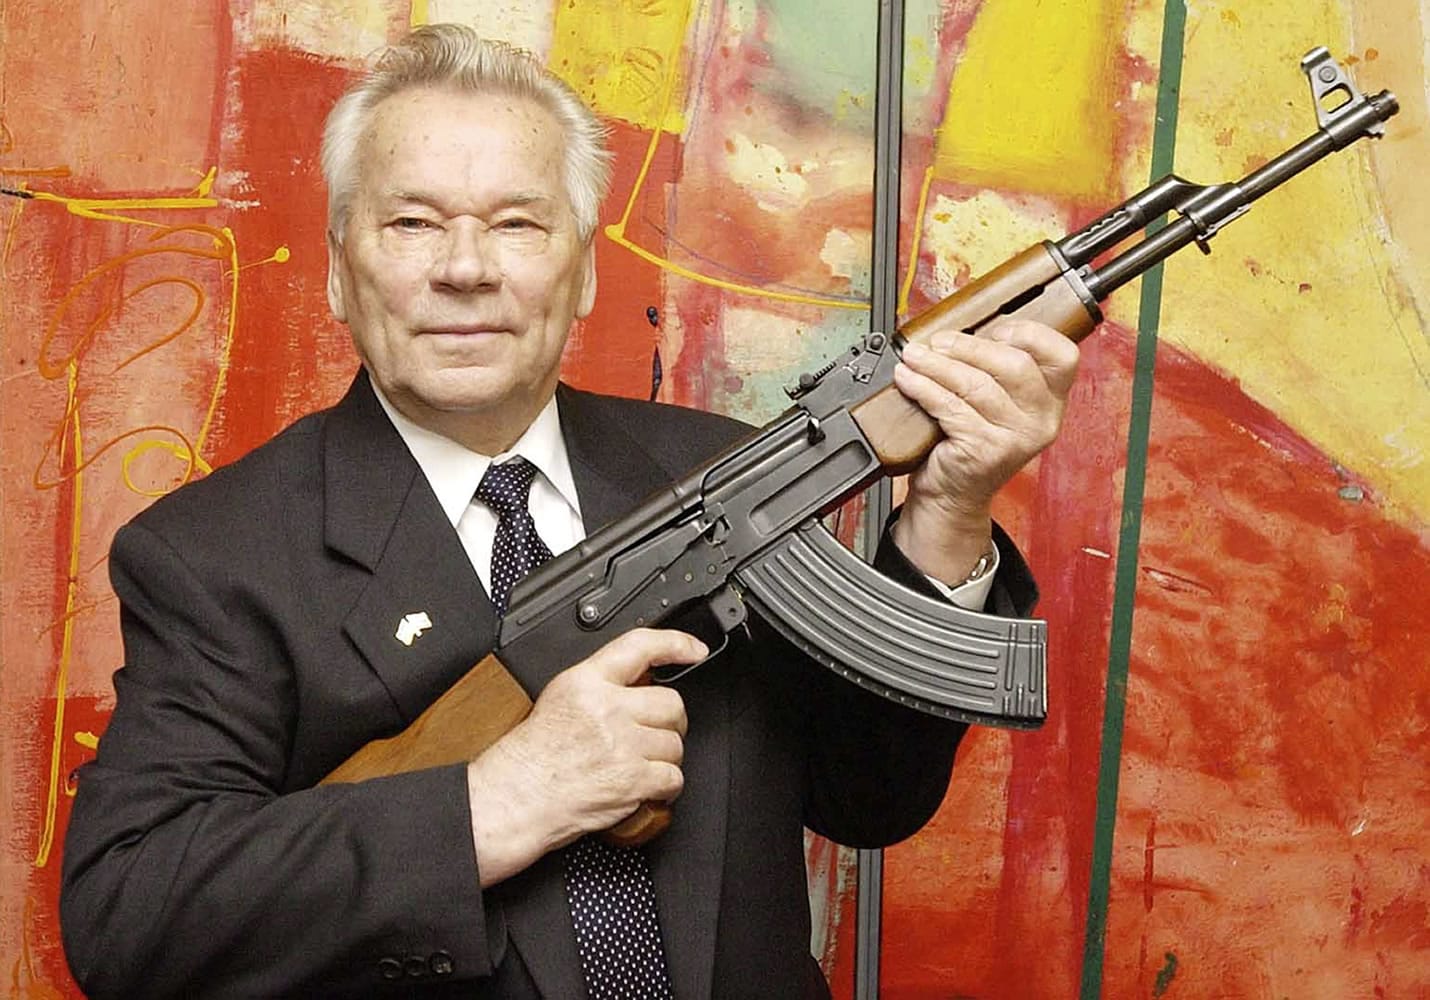 Russian weapon designer Mikhail Kalashnikov presents his legendary assault rifle to the media while opening the exhibition &quot;Kalashnikov -- legend and curse of a weapon&quot; at a weapons museum in Suhl, Germany, on July 26, 2002.